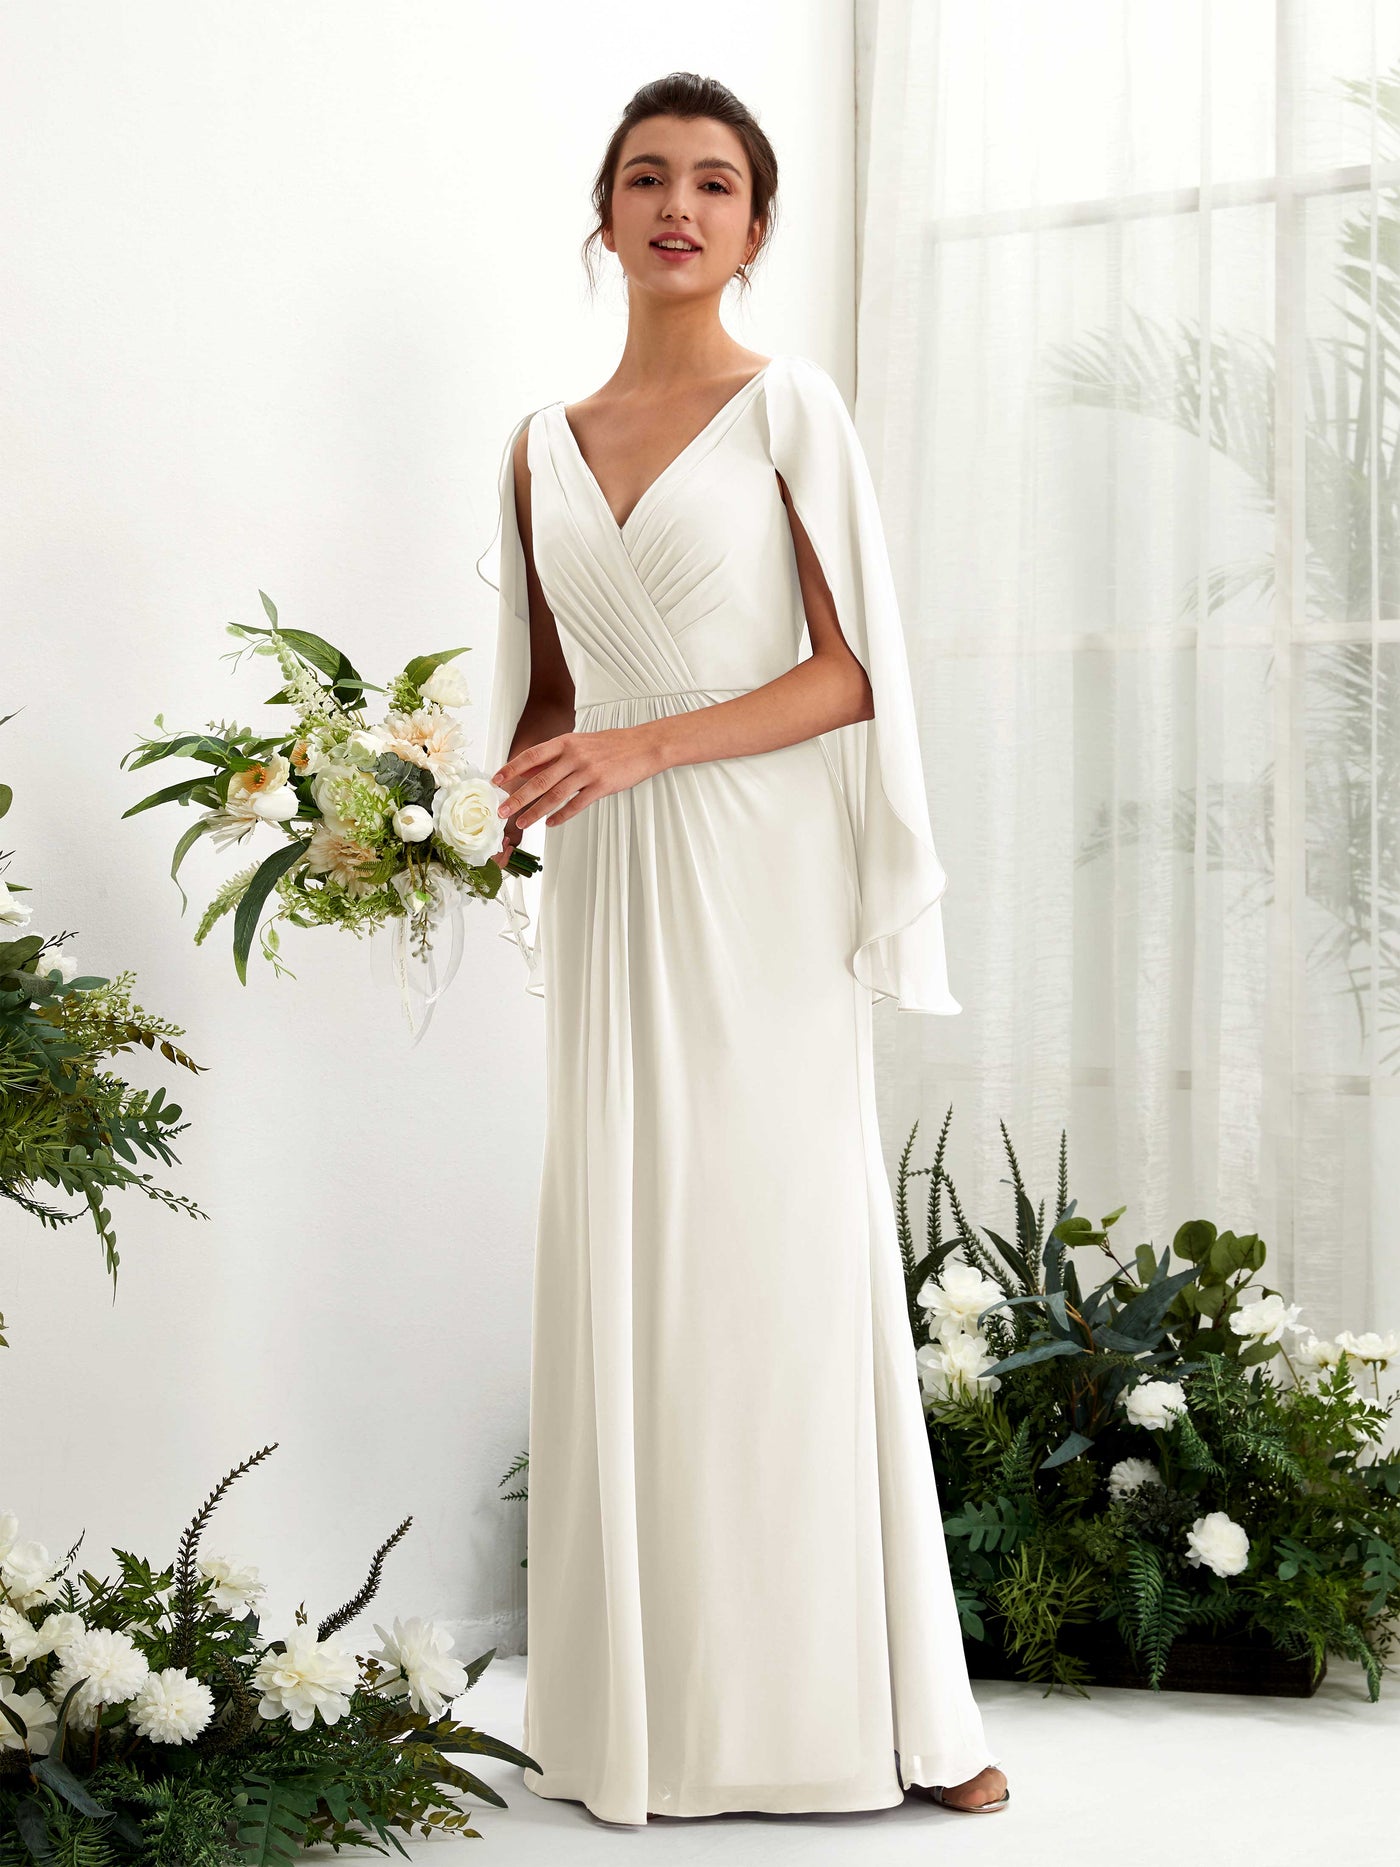 Ivory Bridesmaid Dresses Bridesmaid Dress A-line Chiffon Straps Full Length Long Sleeves Wedding Party Dress (80220126)#color_ivory